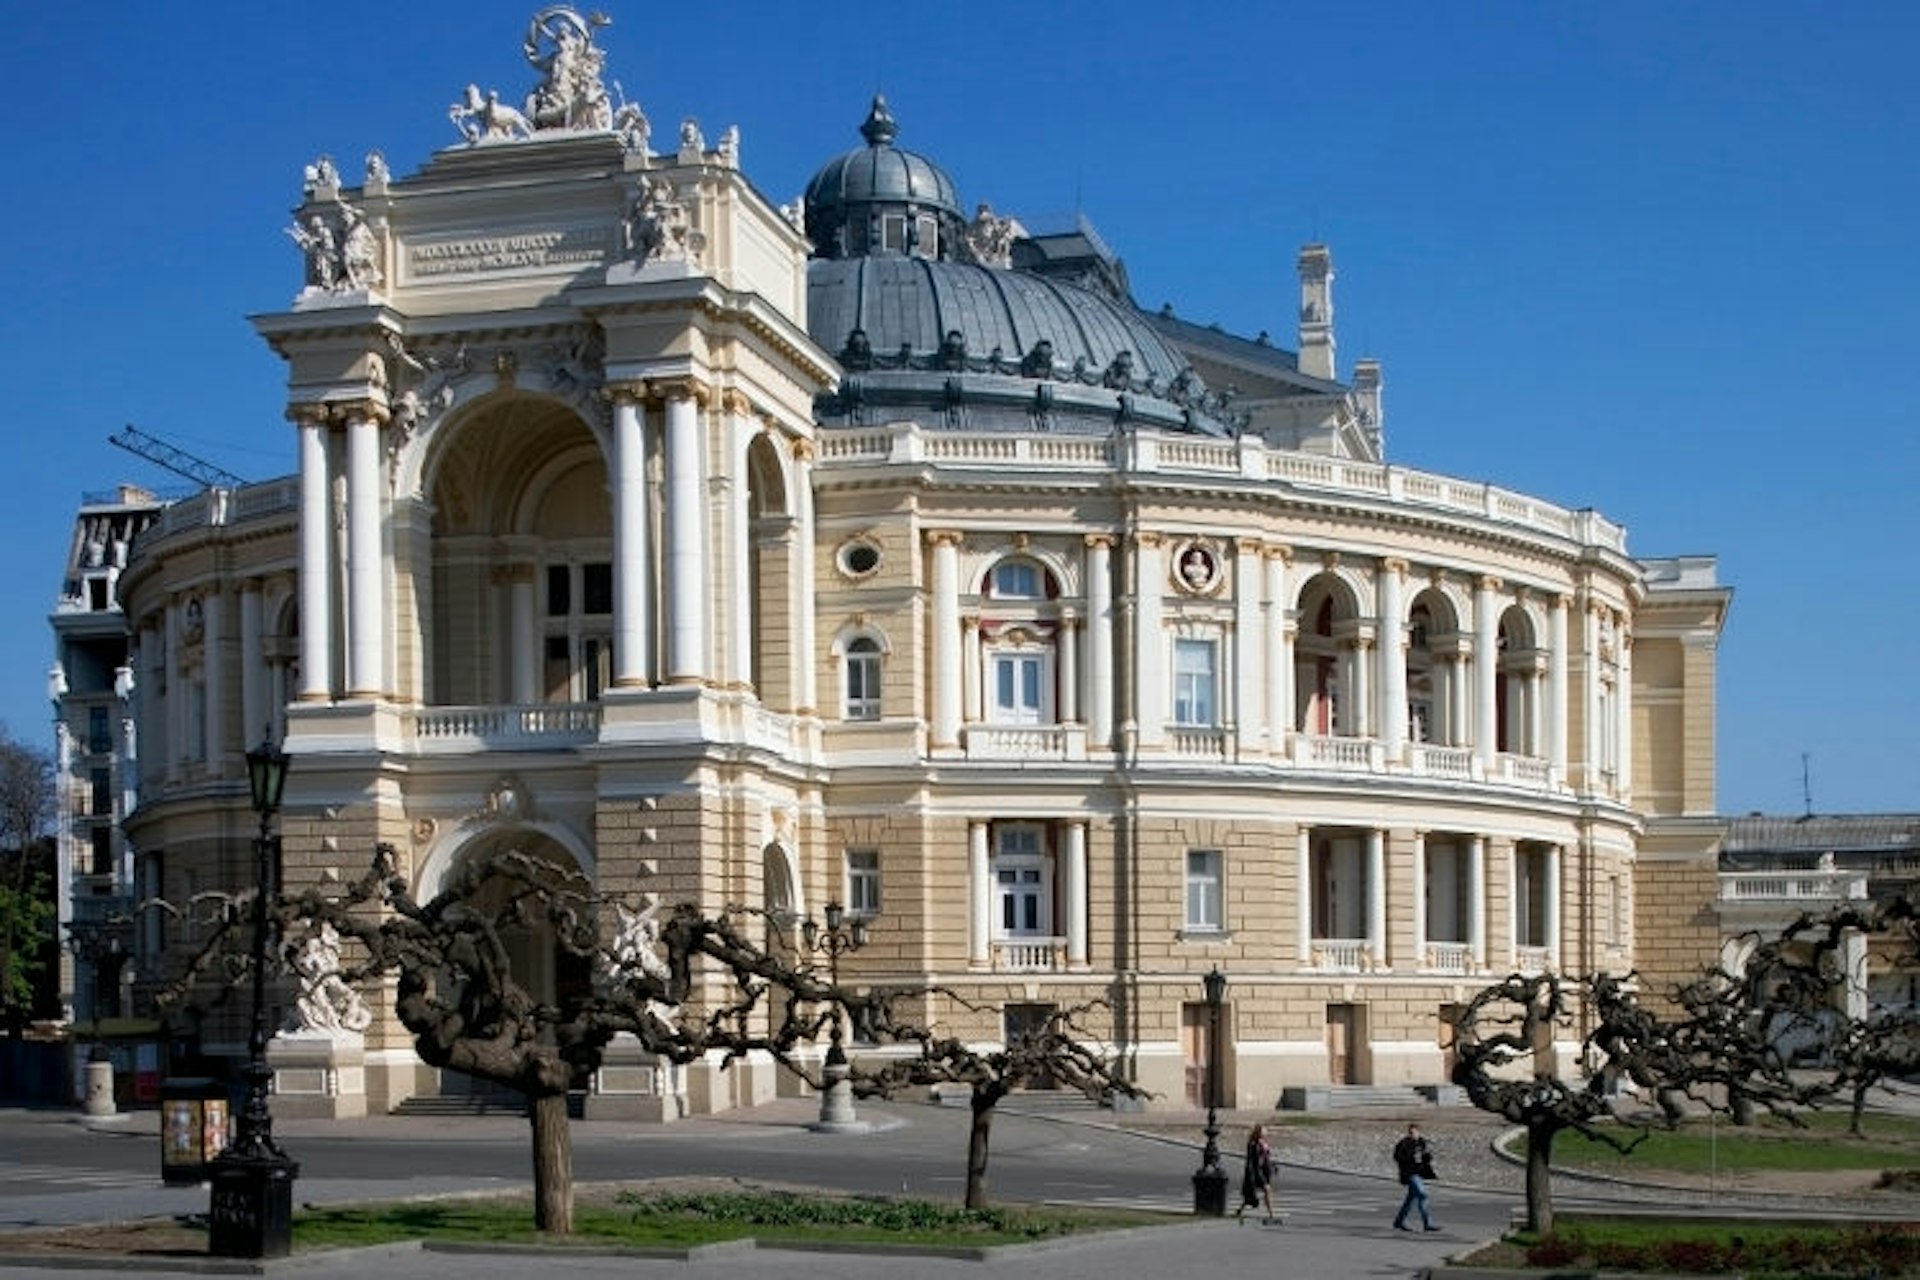 Odessa’s Opera & Ballet Theatre. Image by De Agostini / W Buss / Getty Images